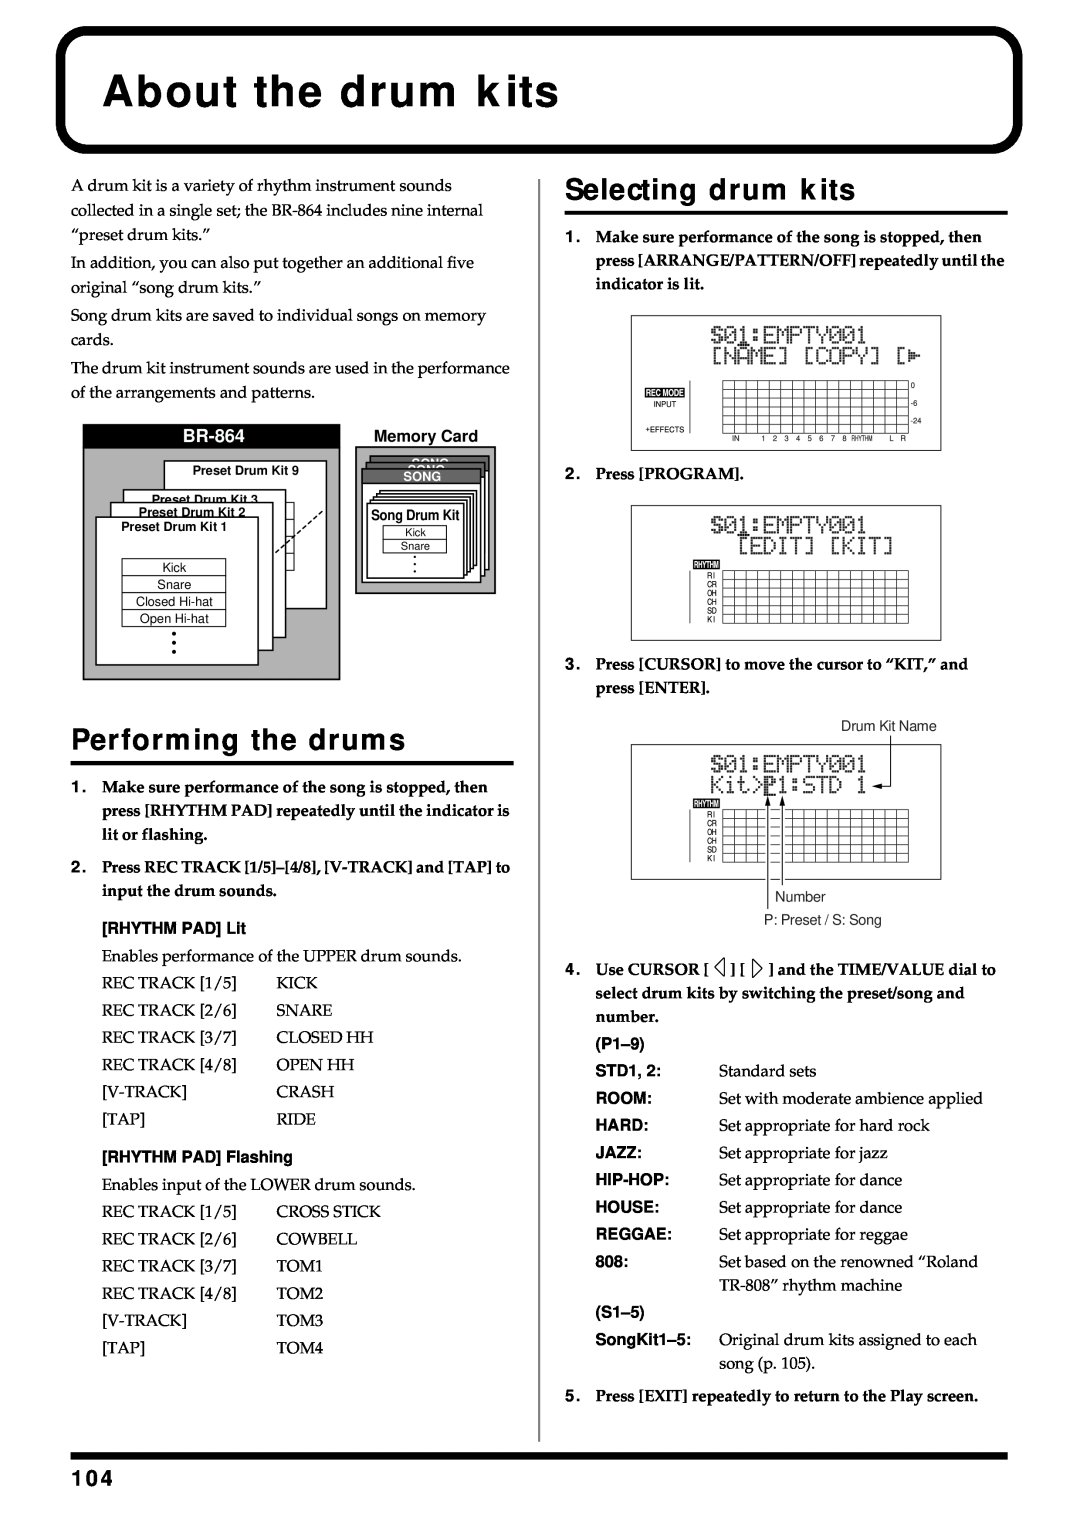 Roland BR-864 owner manual About the drum kits, Selecting drum kits, Performing the drums 